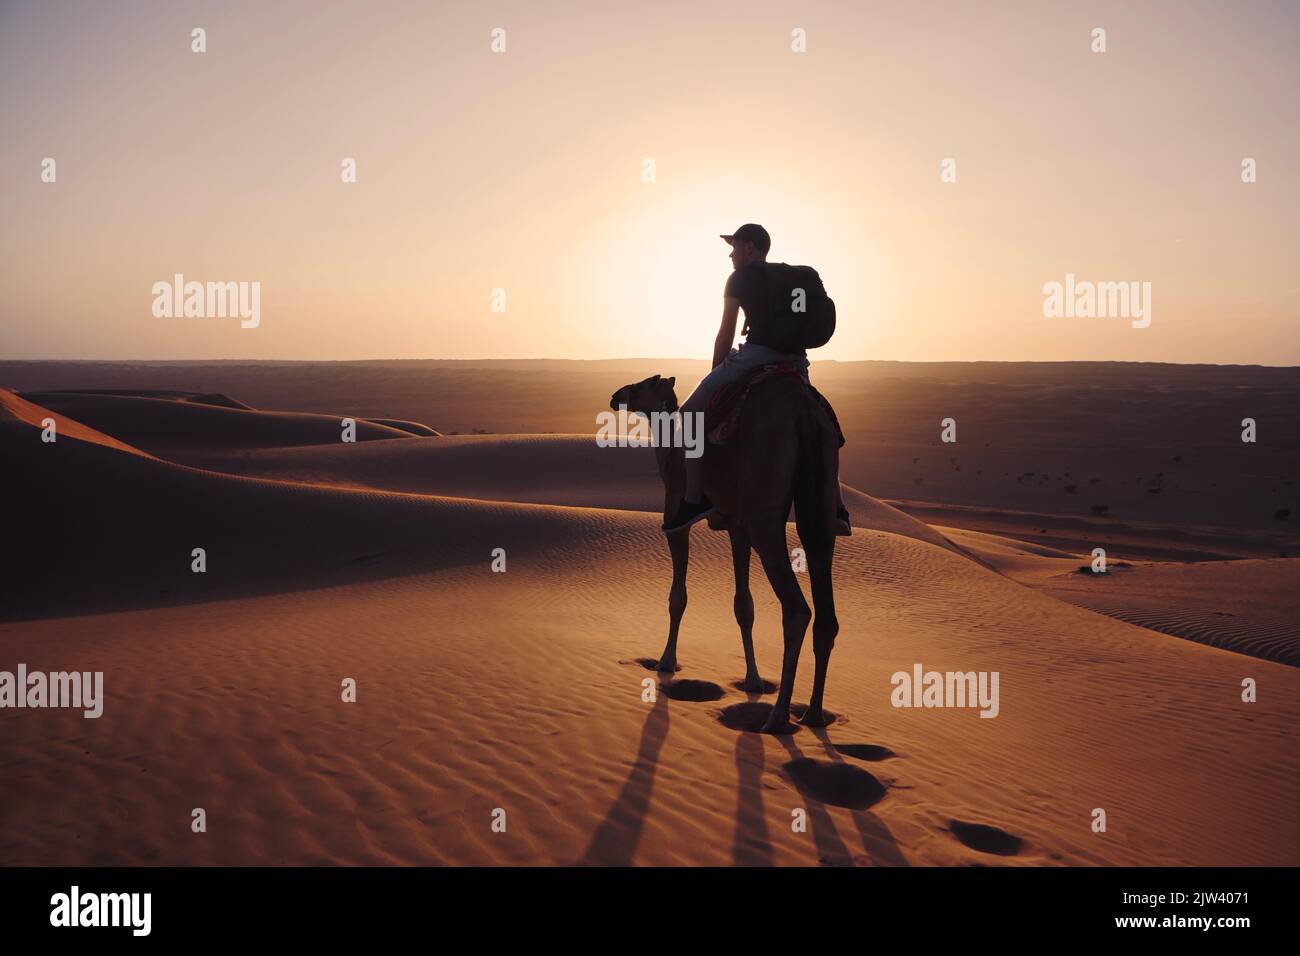 Camel riding in desert at golden sunset. Man enjoying journey on sand dunes. Wahiba Sands in Sultanate of Oman. Stock Photo